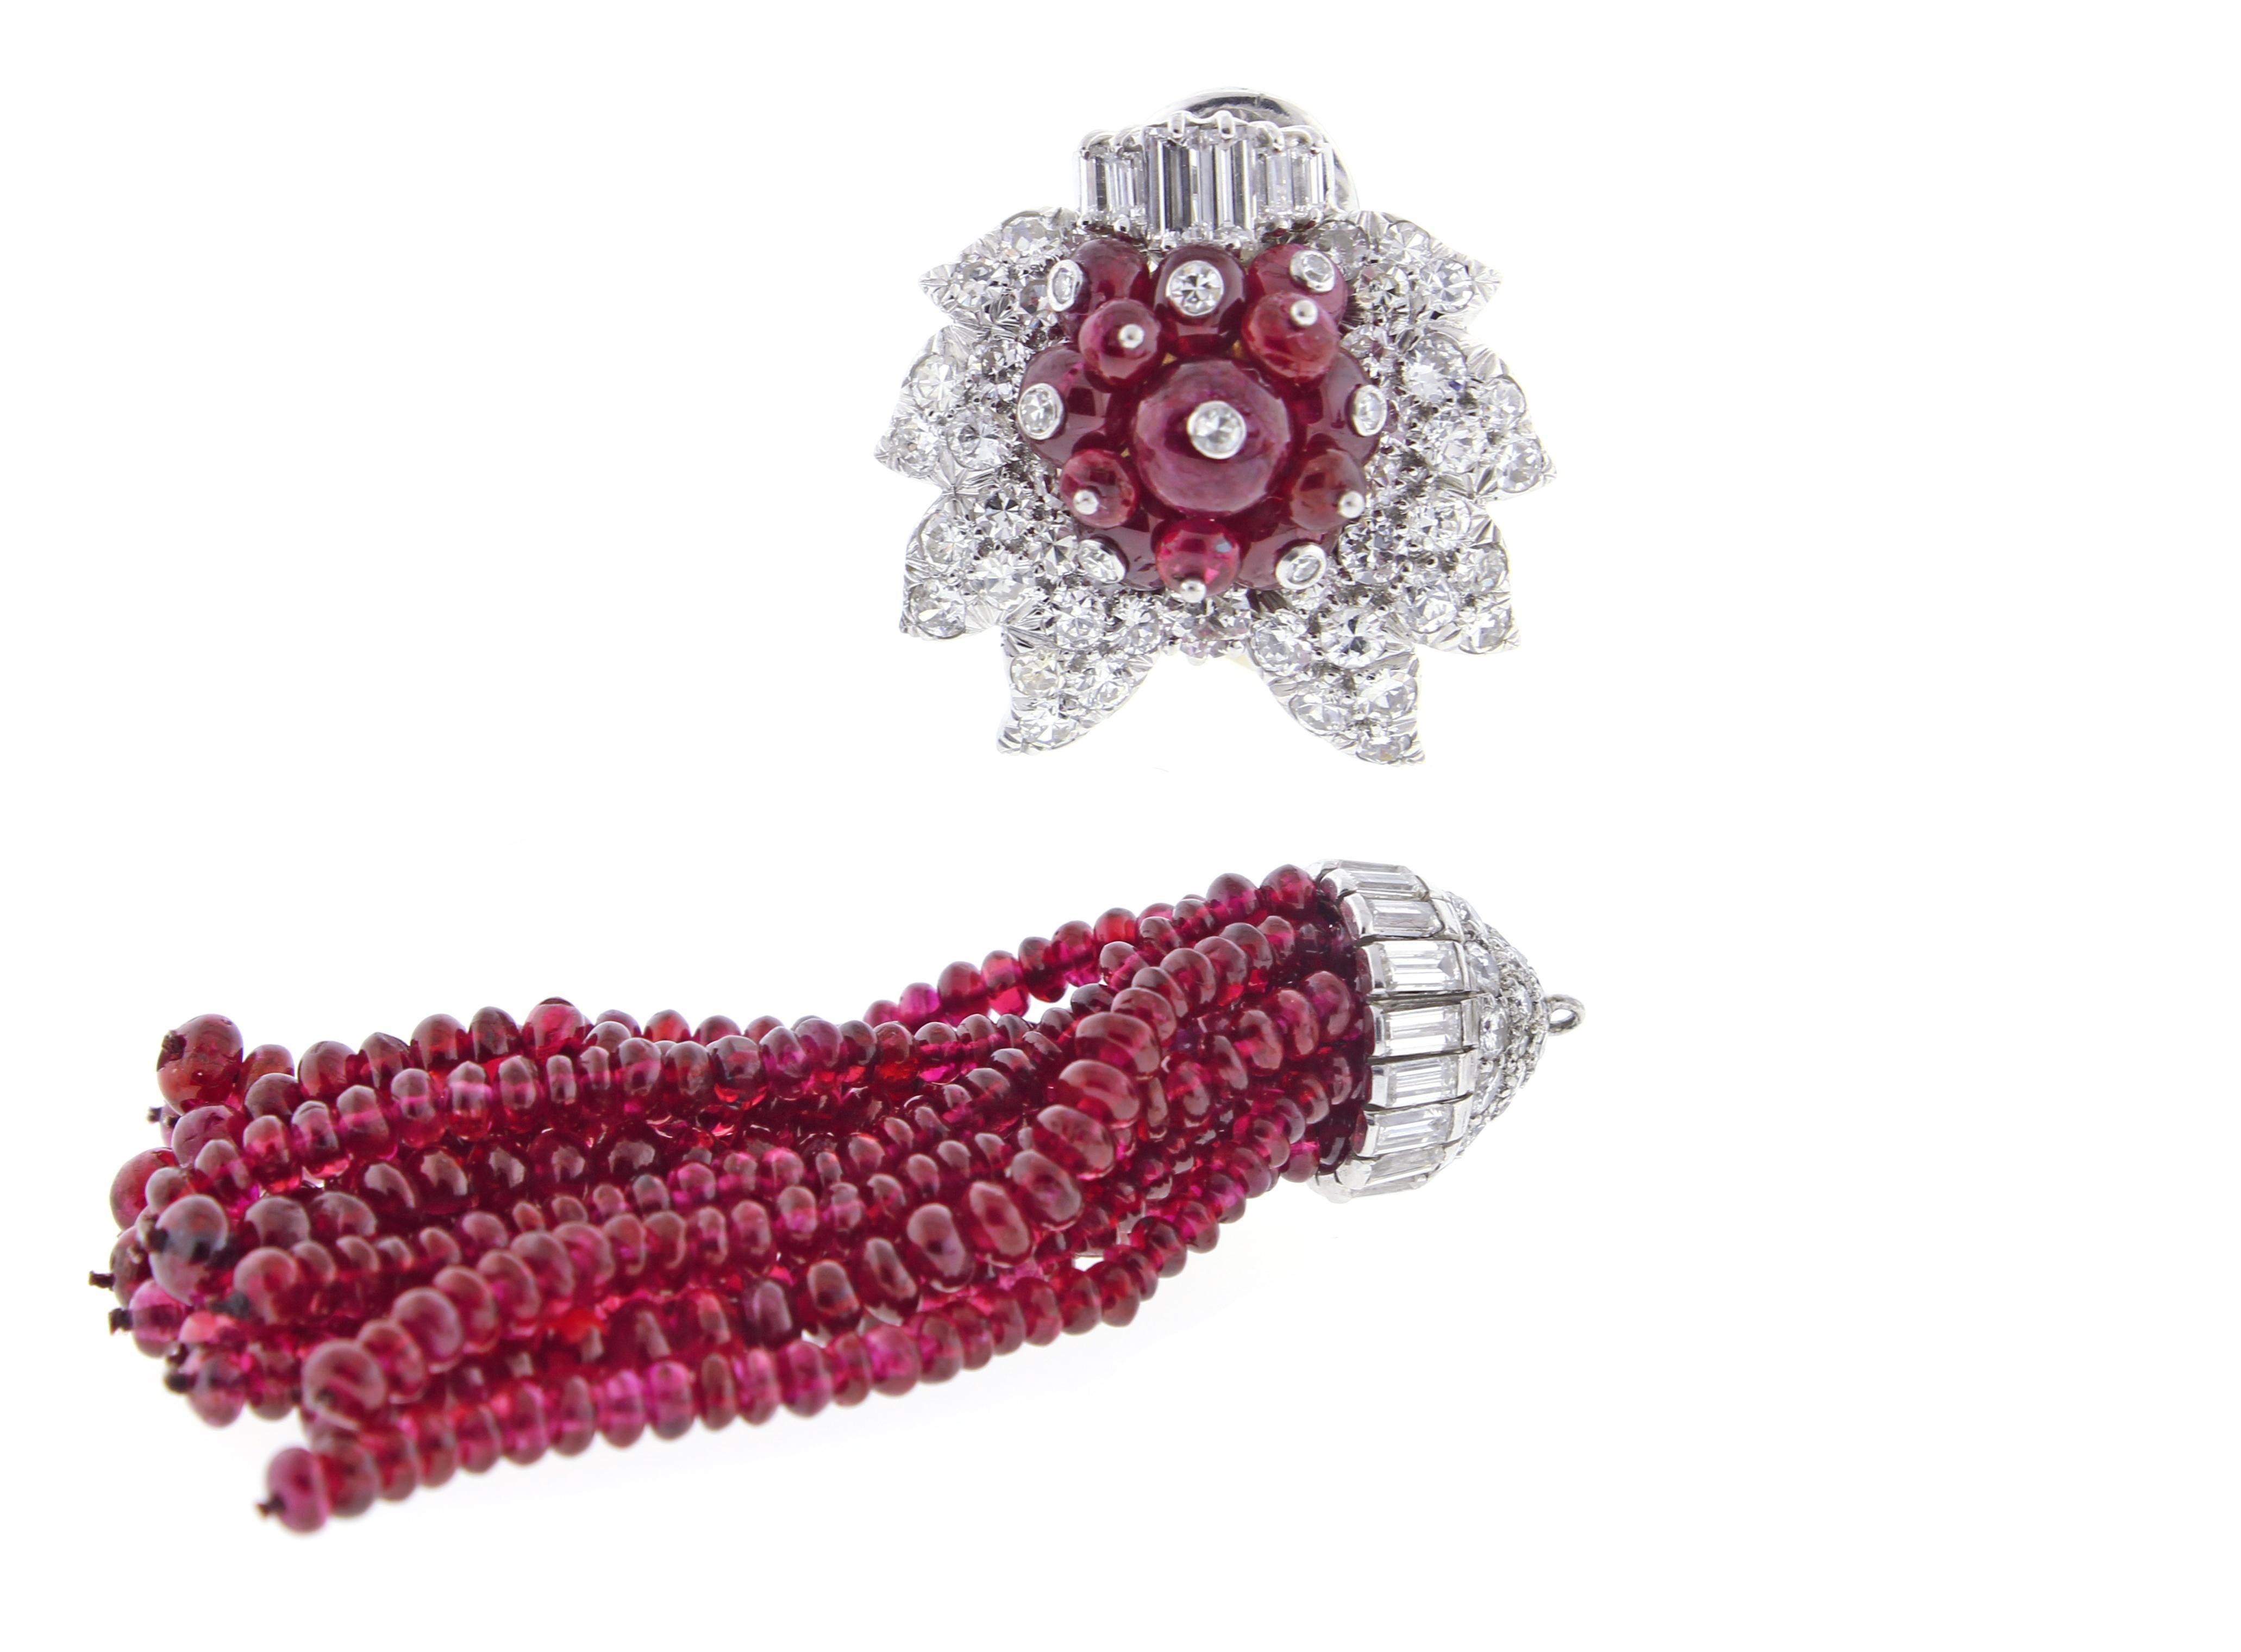 From Andrew Clunn, and pair of diamond and ruby tassel earrings. The earrings feature over 125 carats of fine Burma ruby beads and 7 carats of diamonds. The tassel is detachable.  Clunn worked for  David Webb for almost 12 years becoming Webb's